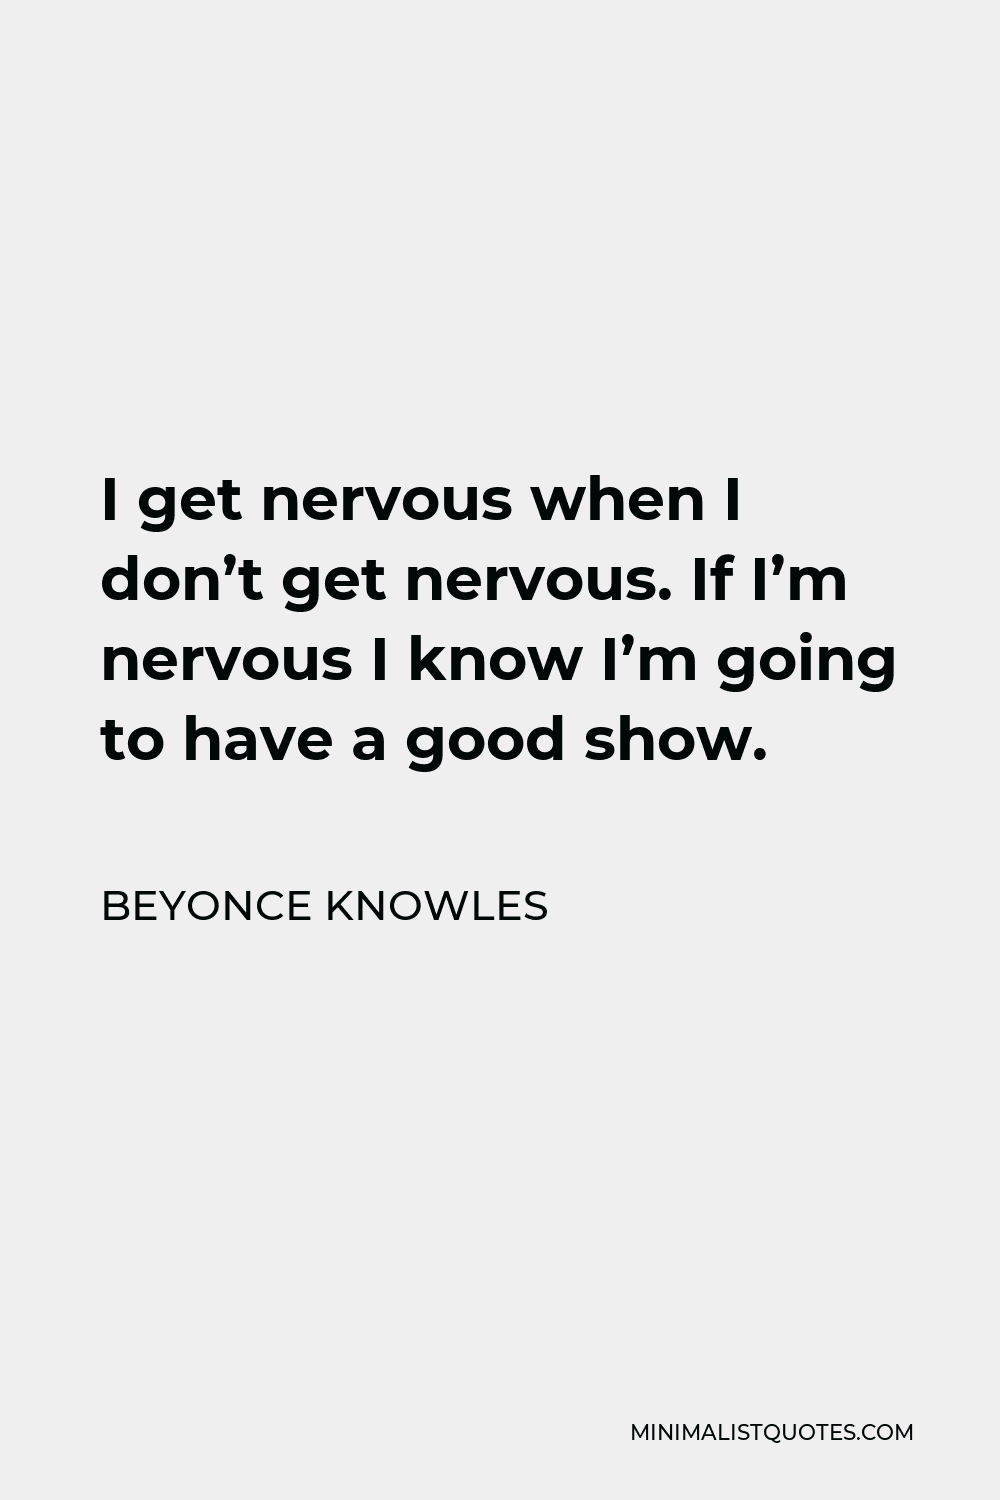 Beyonce Knowles Quote - I get nervous when I don’t get nervous. If I’m nervous I know I’m going to have a good show.